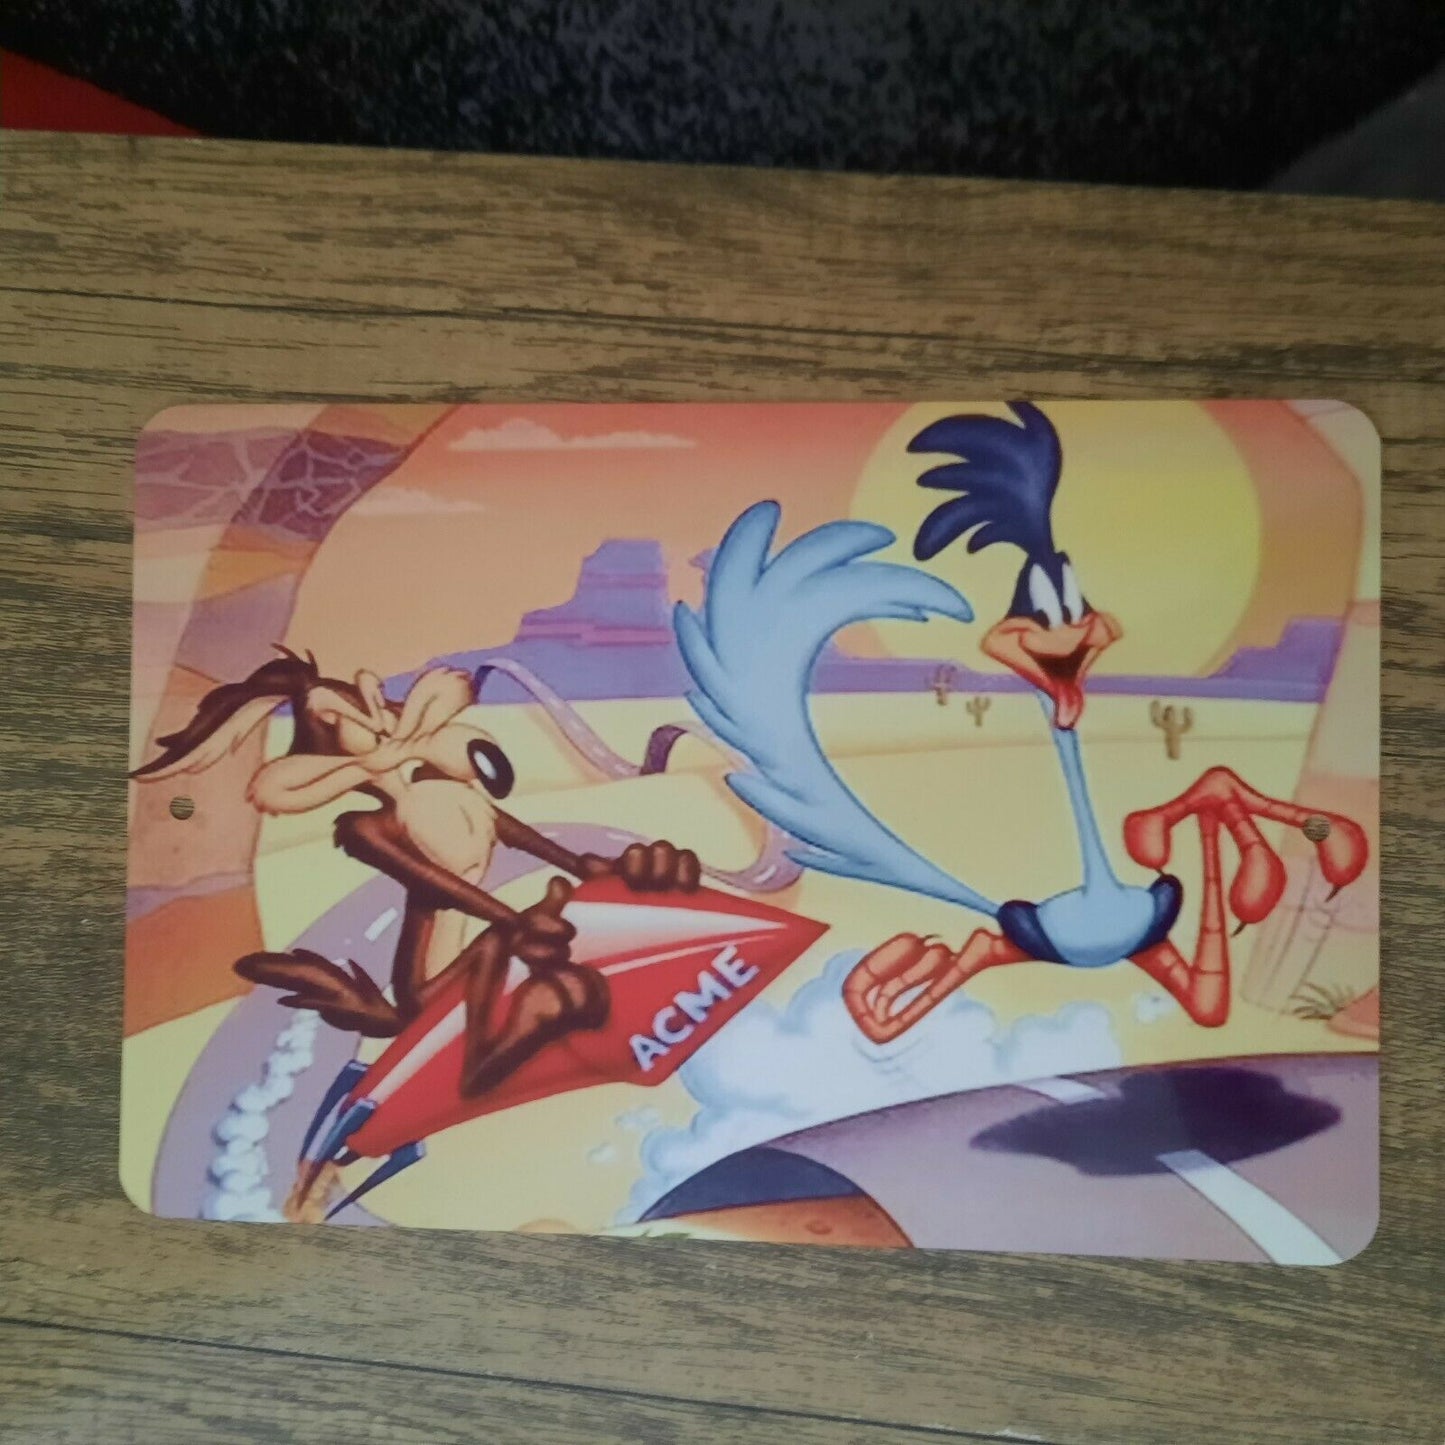 Wile E Coyote chasing Road Runner on Rocket 8x12 Metal Wall Sign Looney Tunes